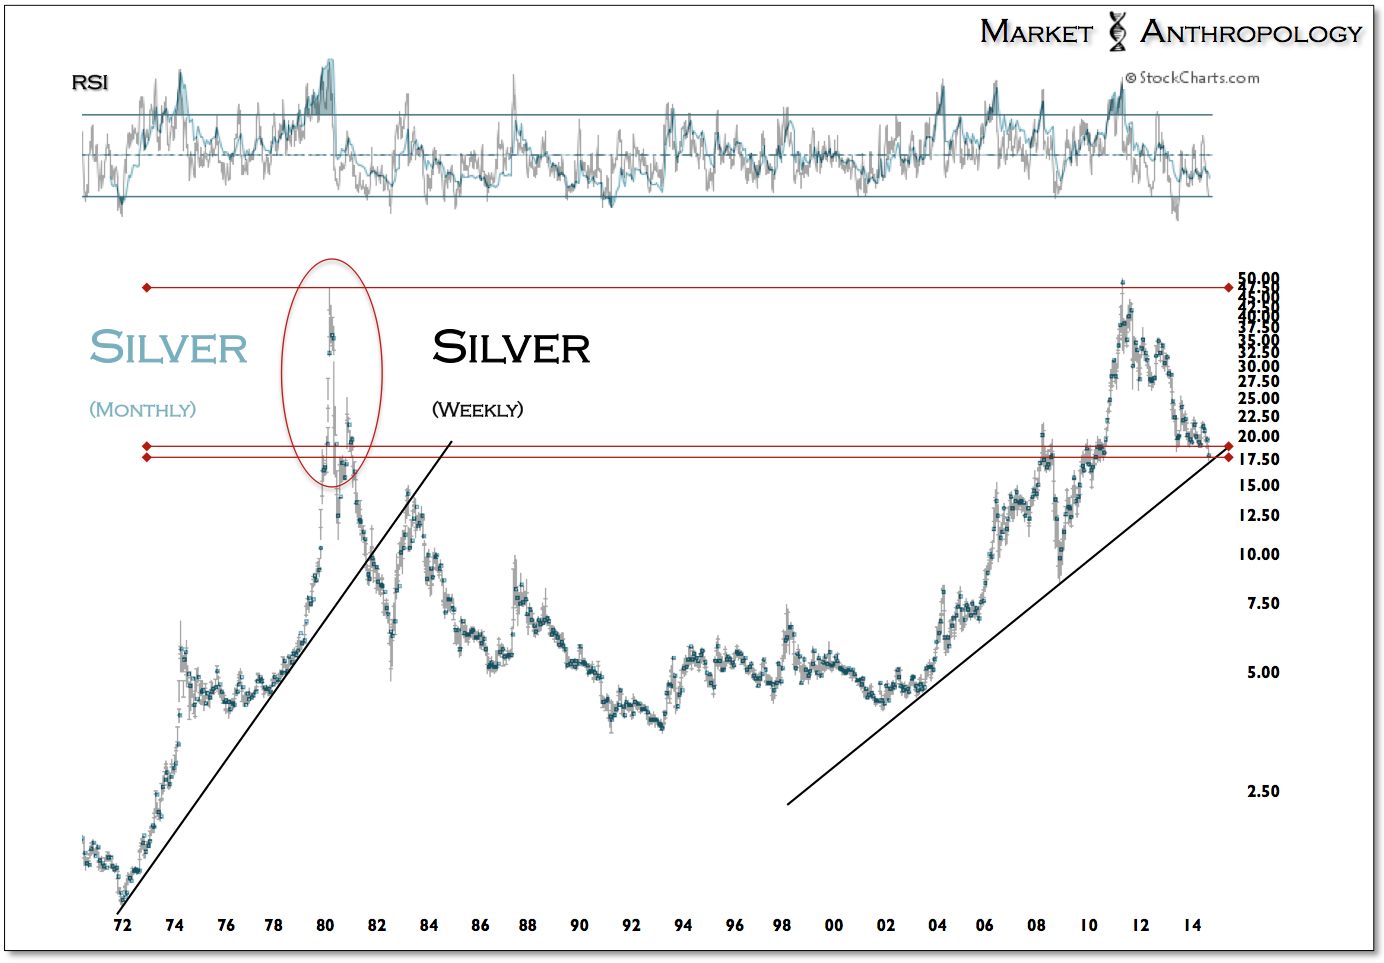 Silver Weekly vs Silver Monthly Chart